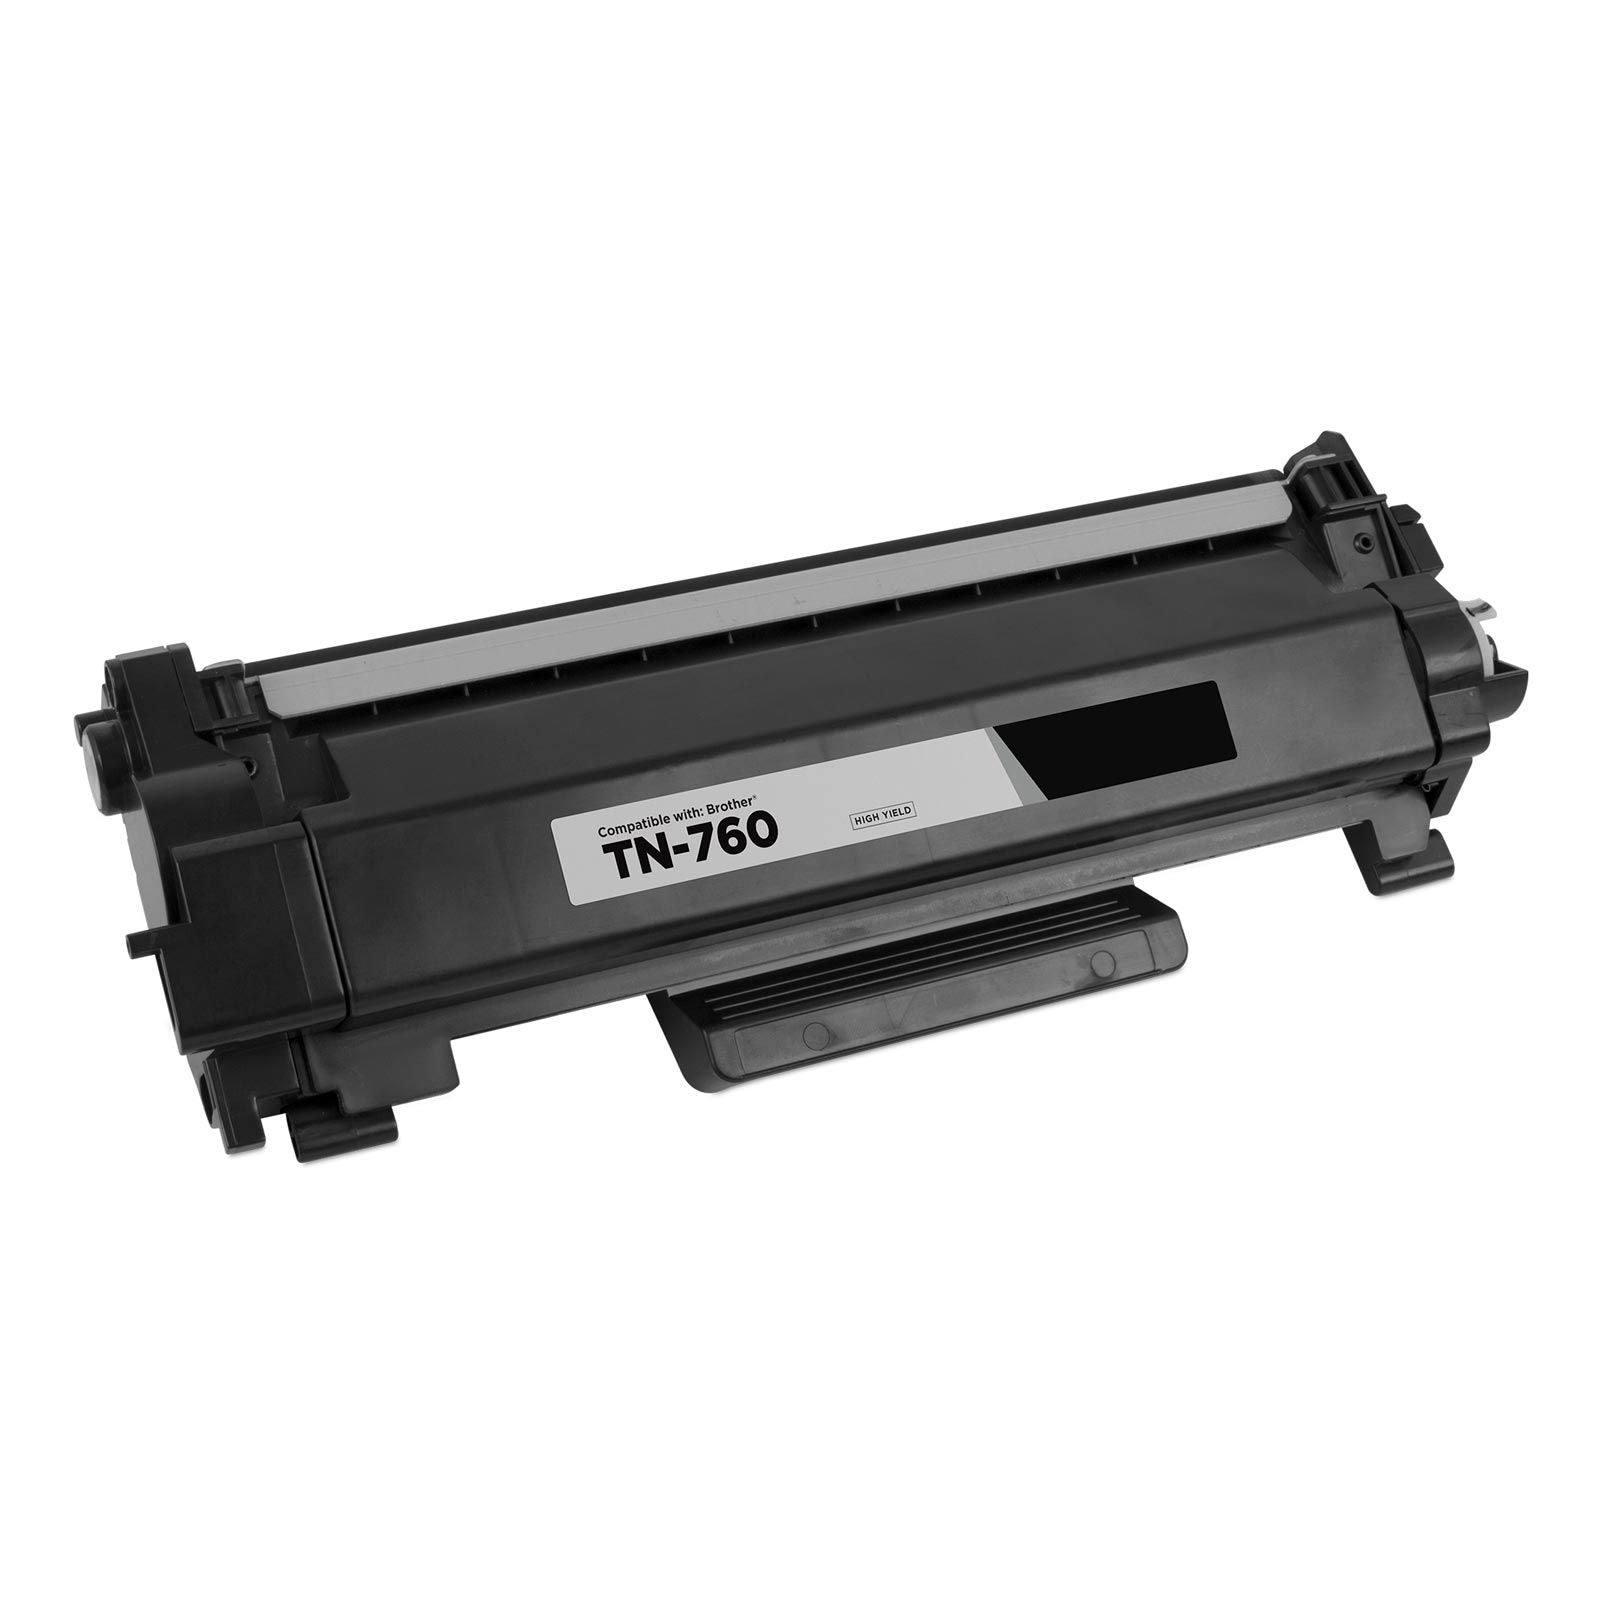 TN760 IMPERIAL BRAND BROTHER TN760 TONER CARTRIDGE 3,000 PAGES